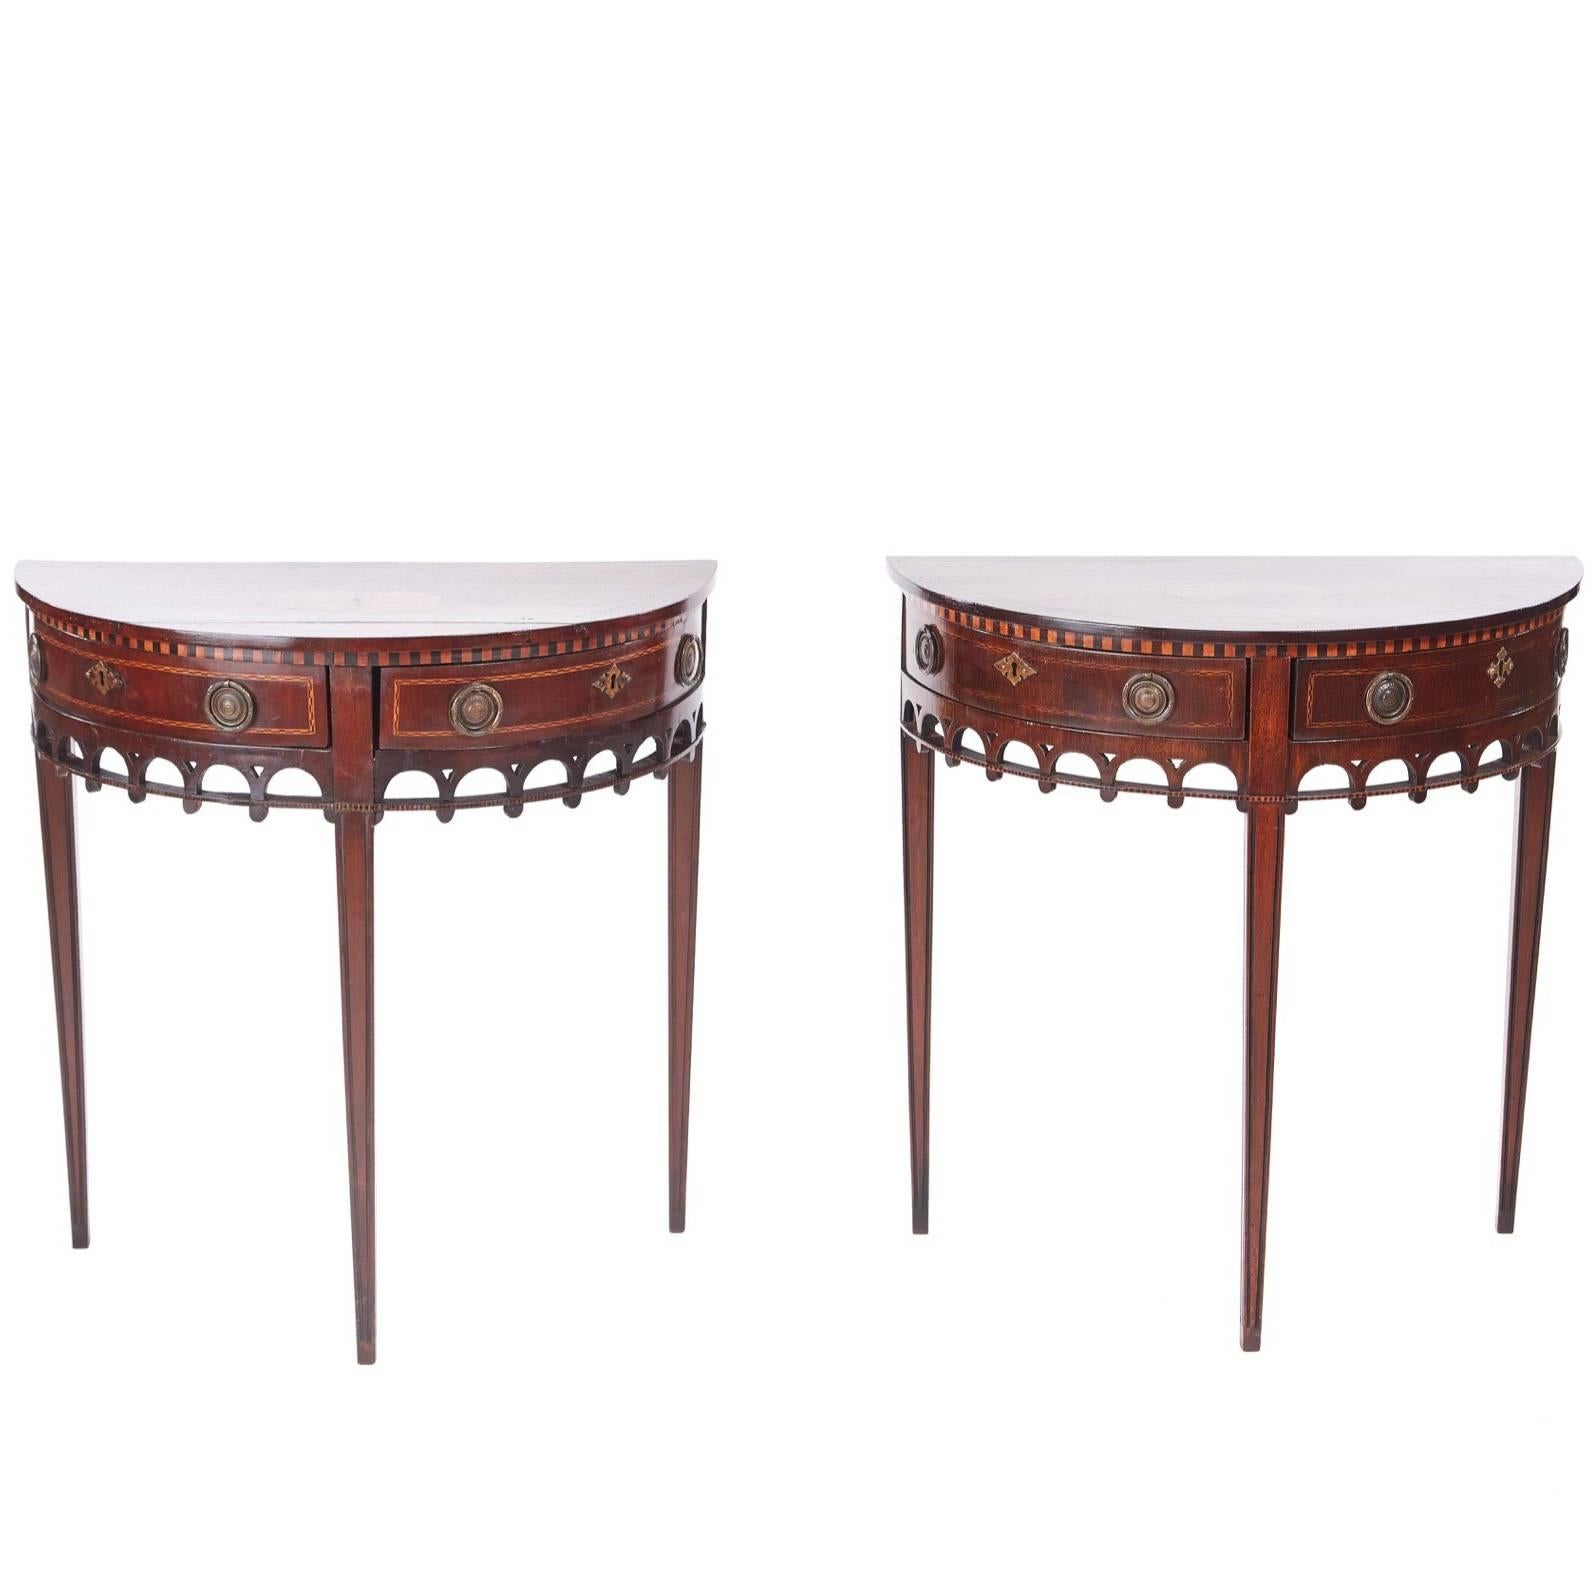 Pair of Antique Dutch Mahogany Inlaid Console Tables